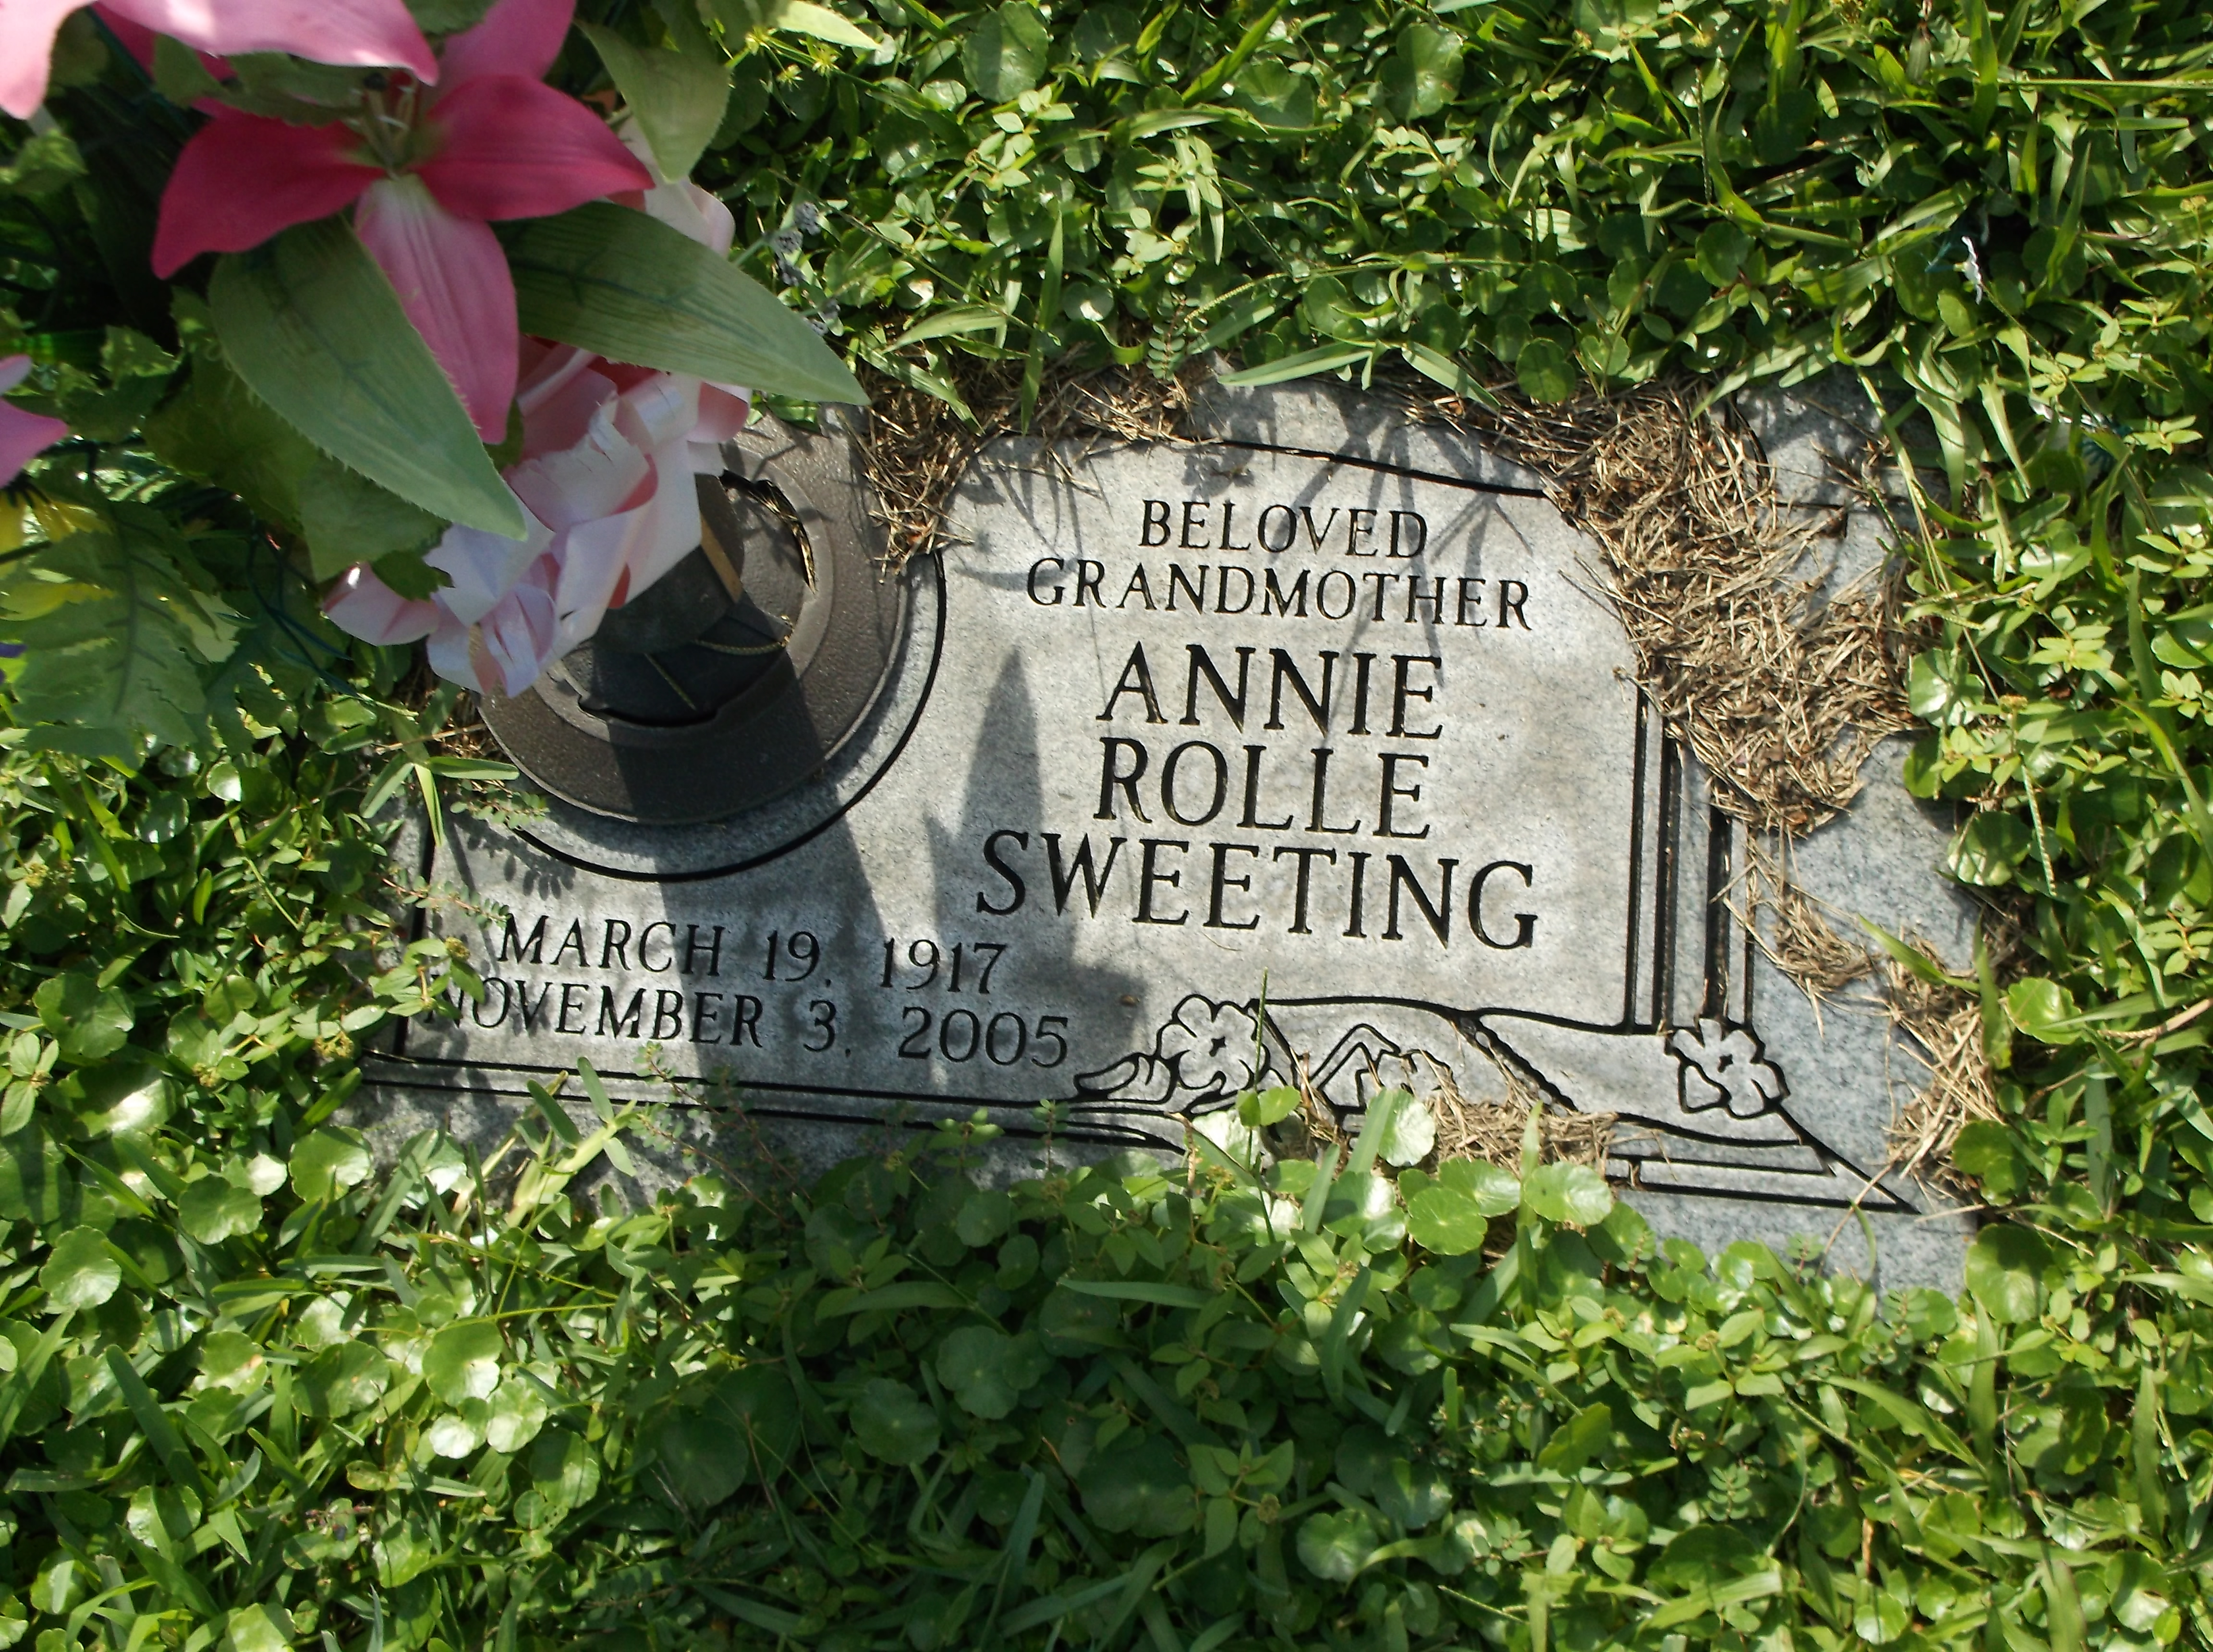 Annie Rolle Sweeting